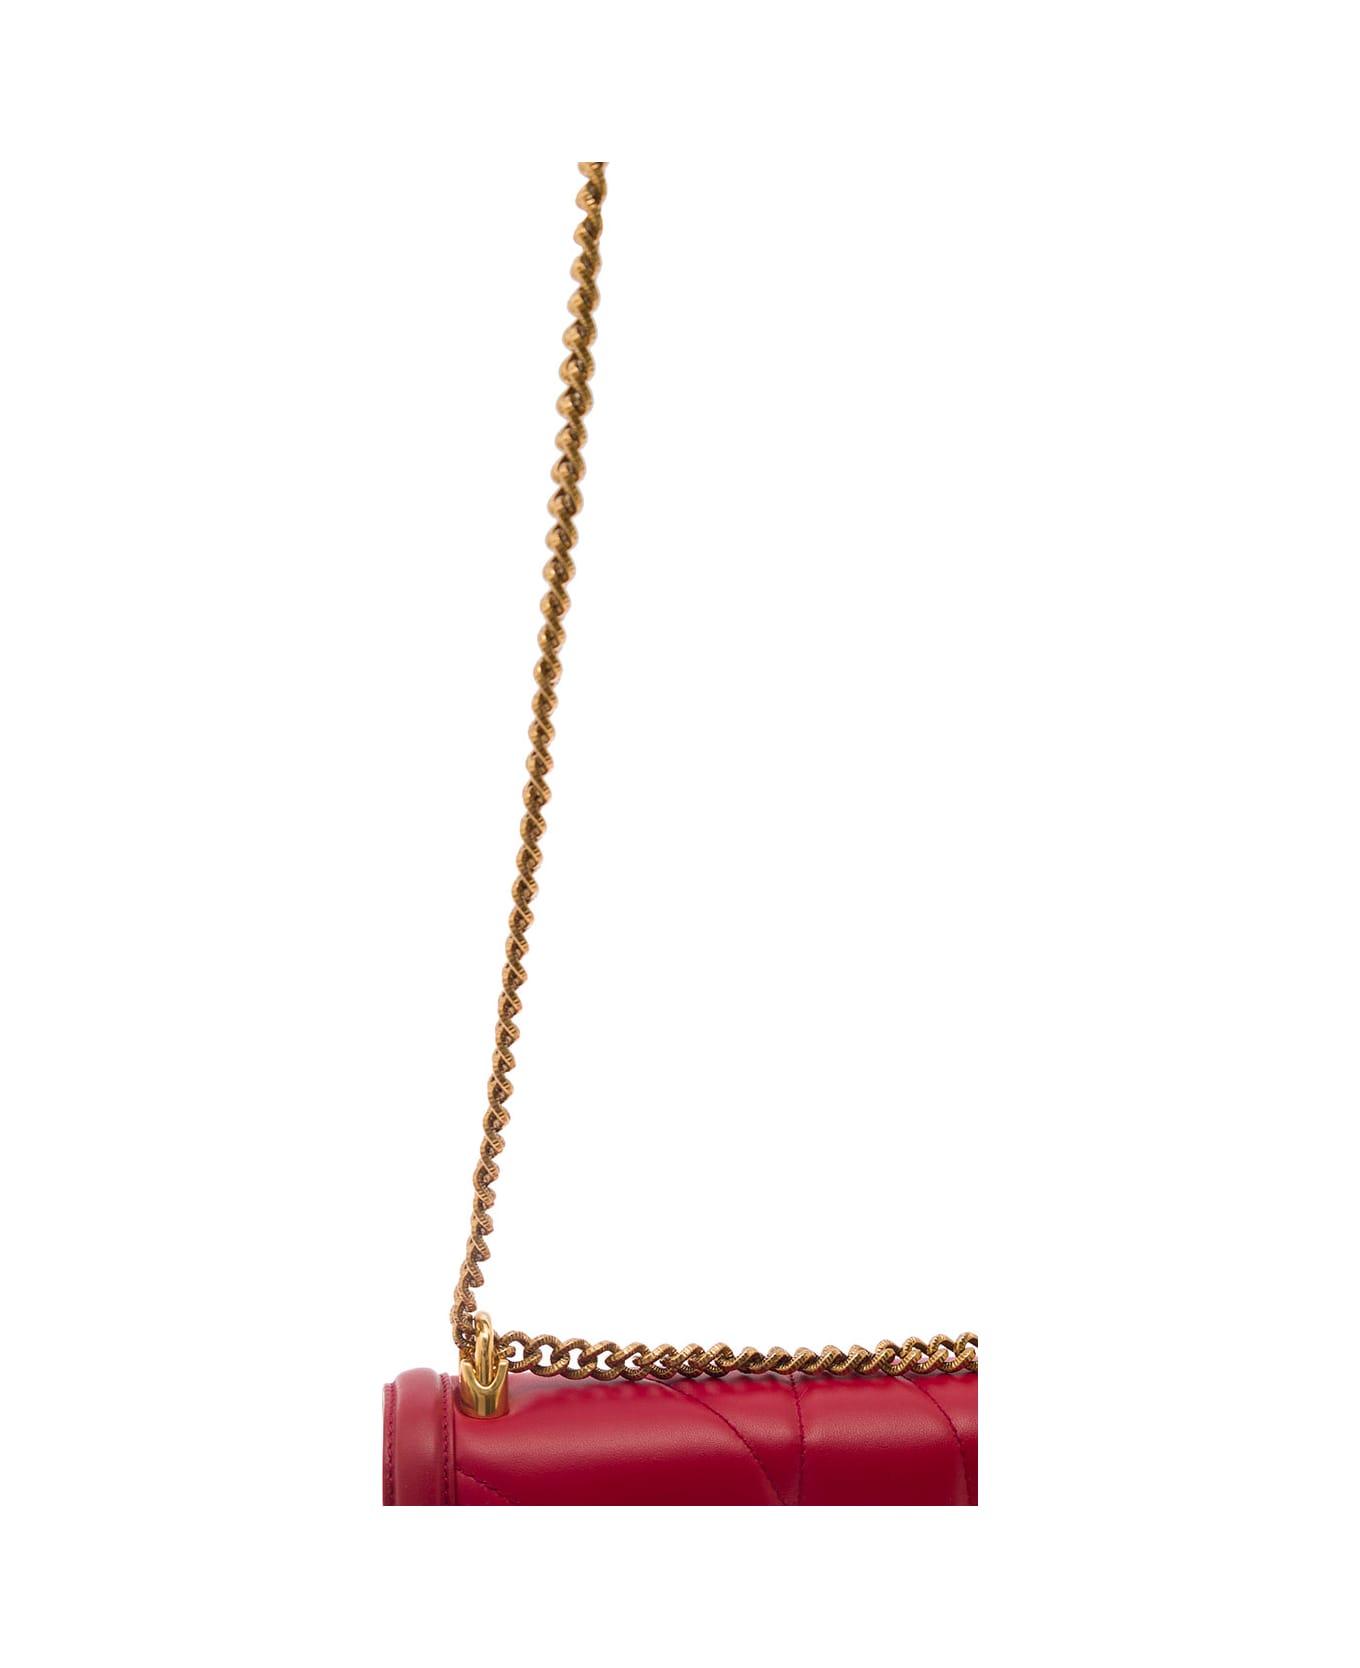 Dolce & Gabbana 'devotion' Shoulder Bag With Heart Jewel Detail In Matelassè Leather Woman - Red